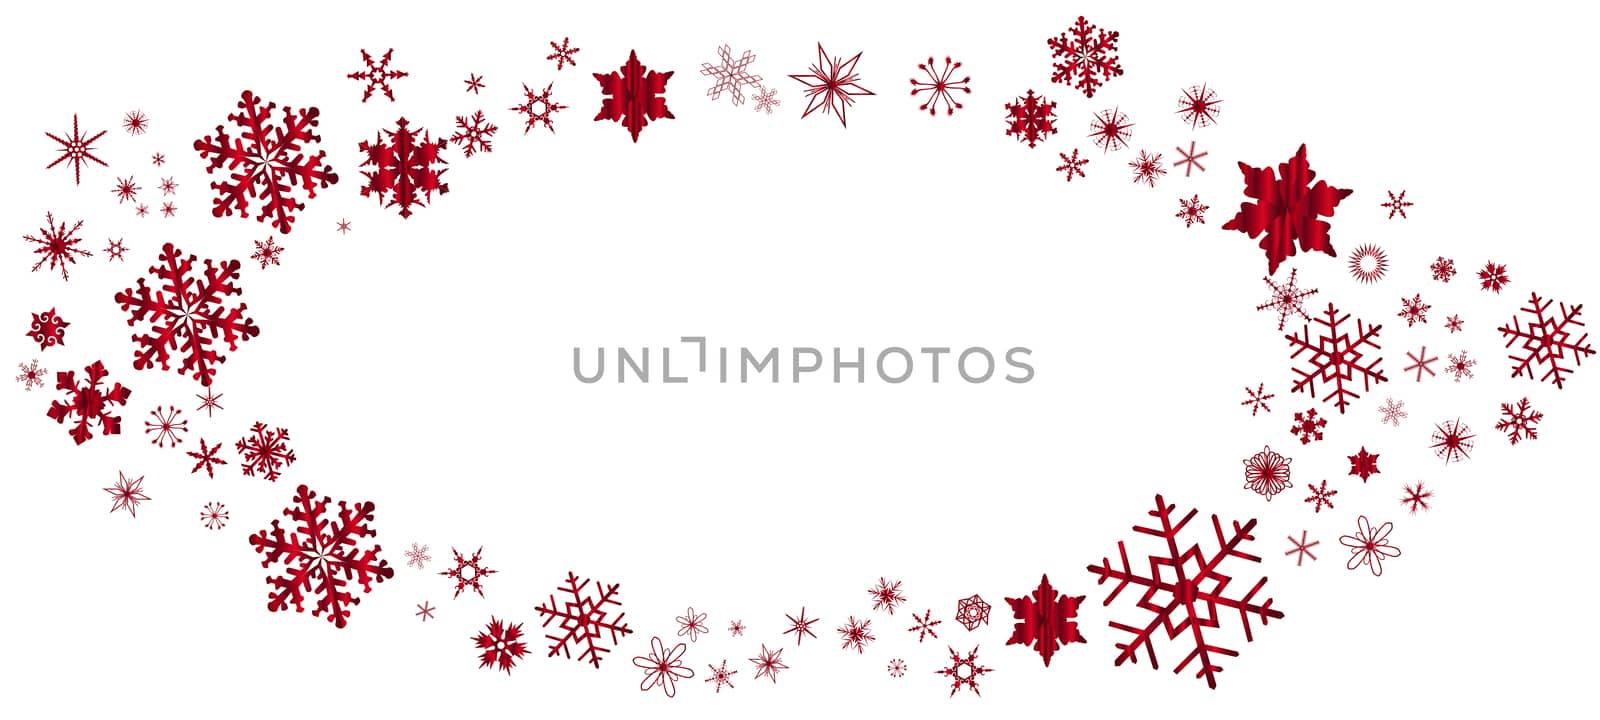 An oval of snowflakes in red over a white background